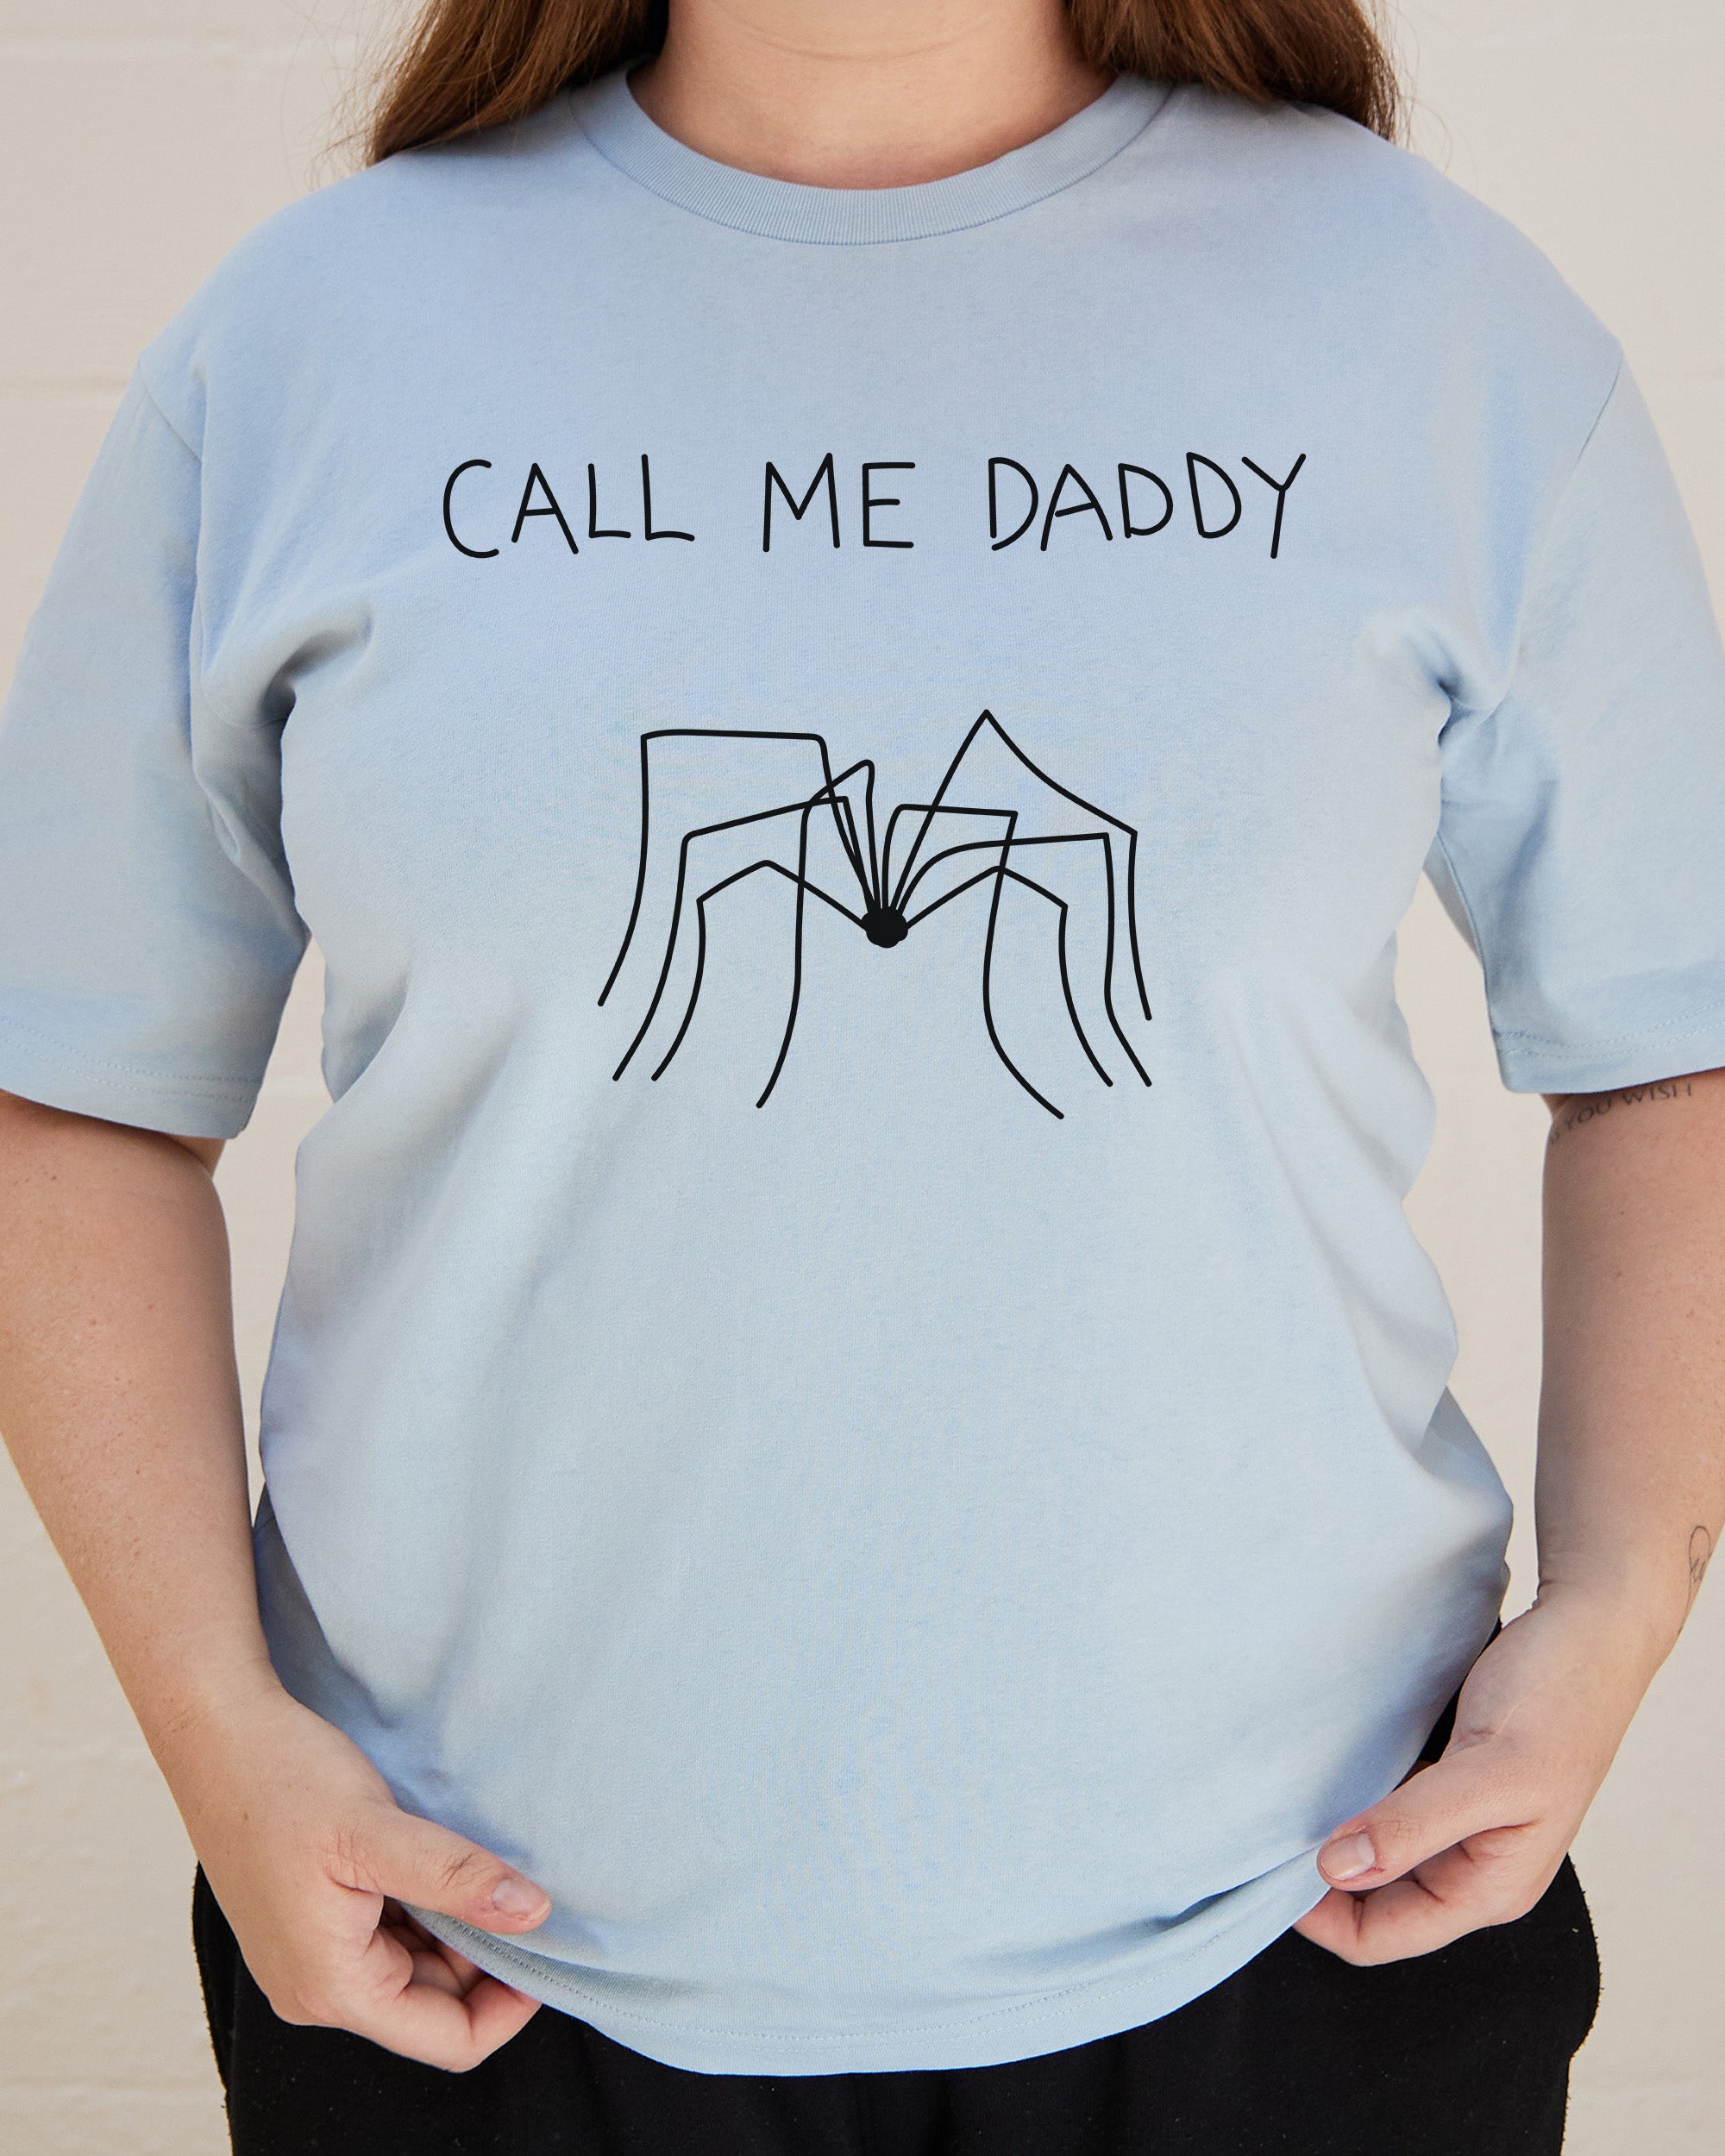 Who's Your Daddy T-Shirt Australia Online